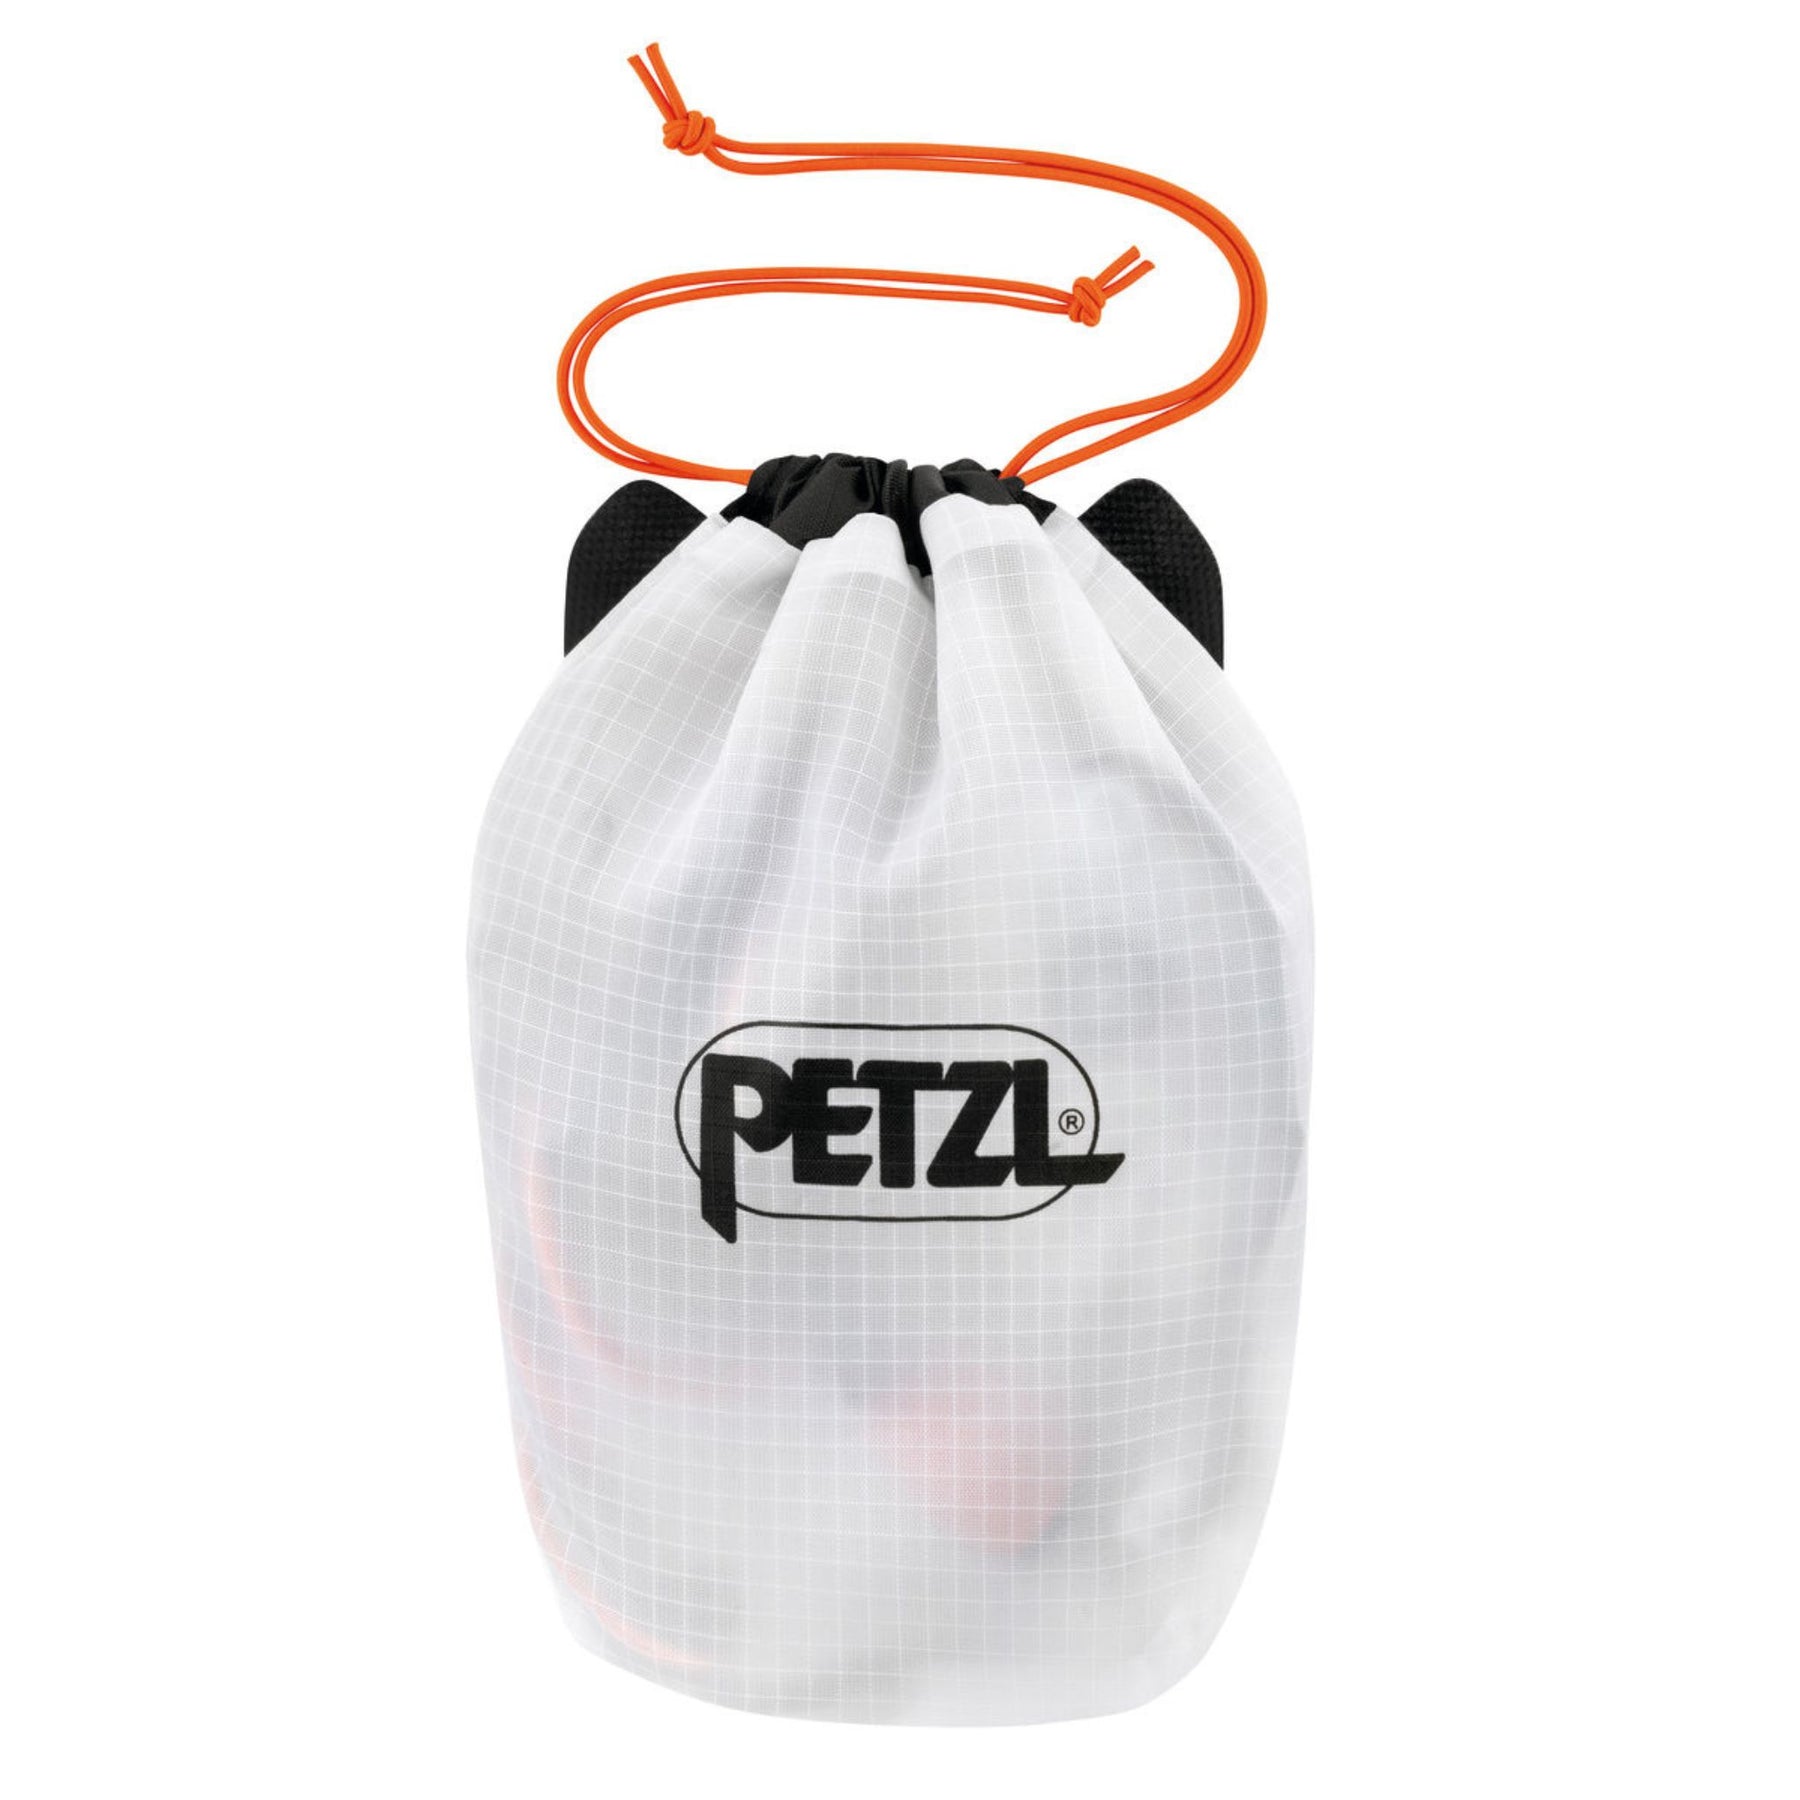 Has anyone here used/owned the Petzl Nao RL for a long time? And